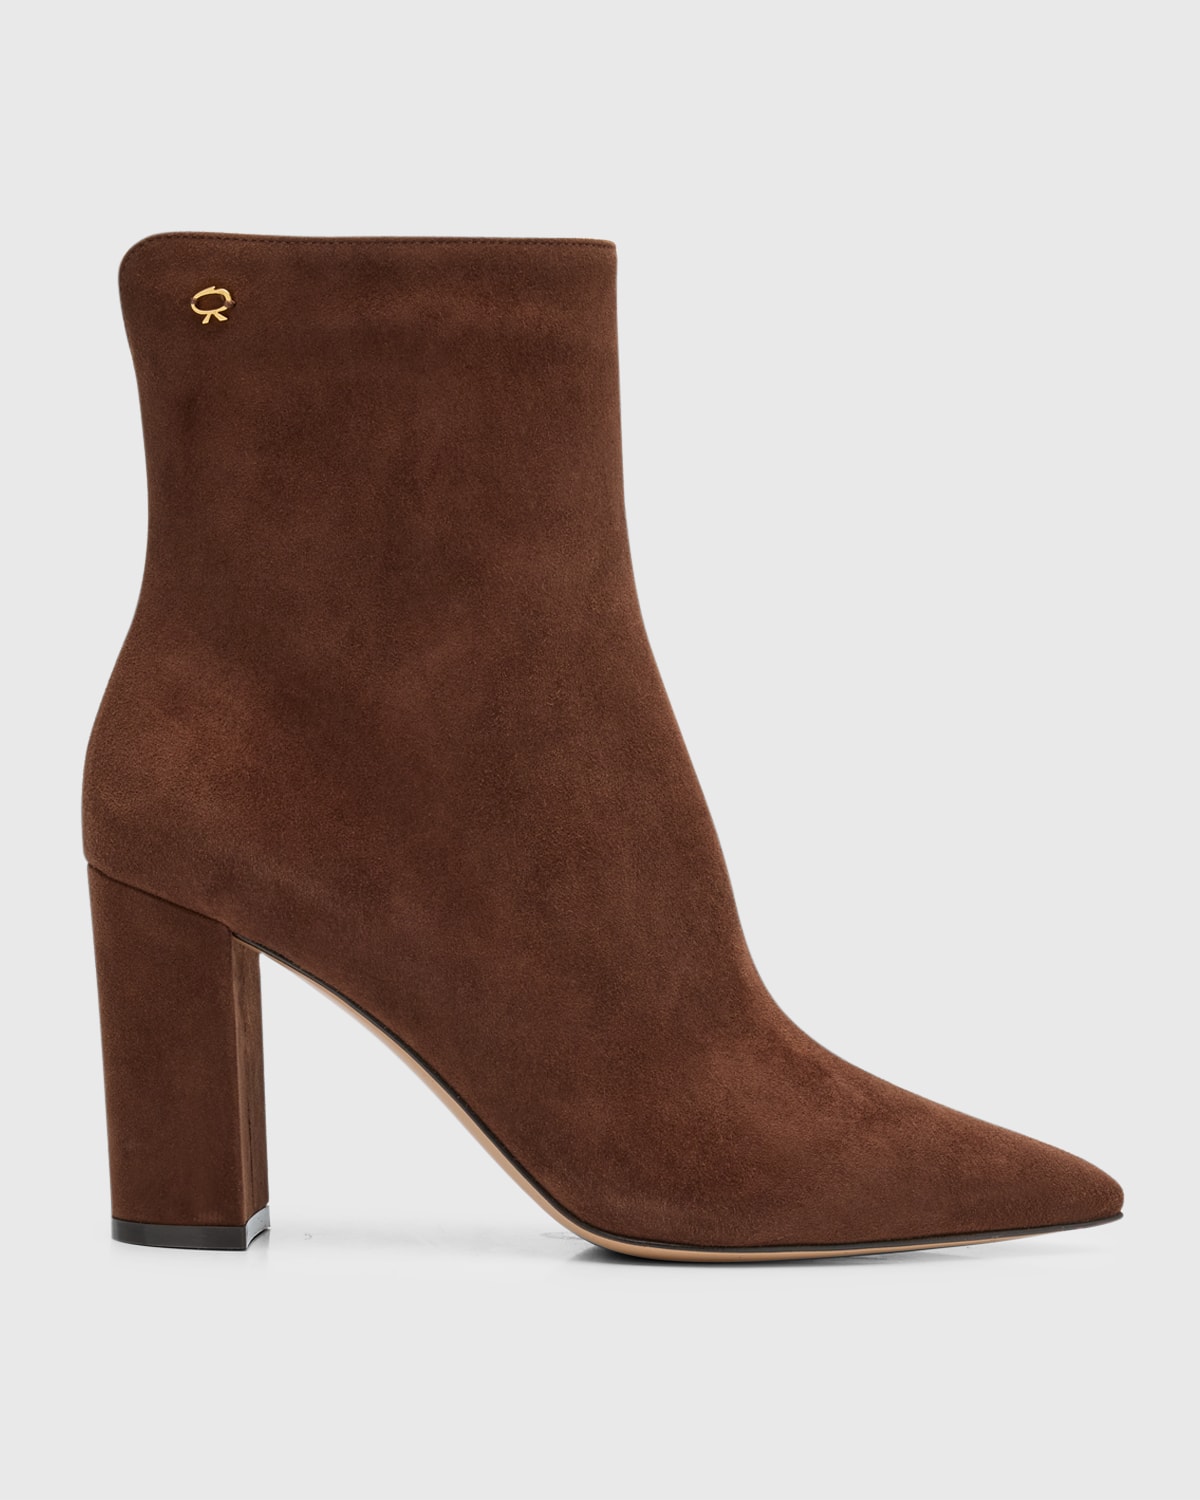 Gianvito Rossi Lyell Suede Ankle Booties In Brown